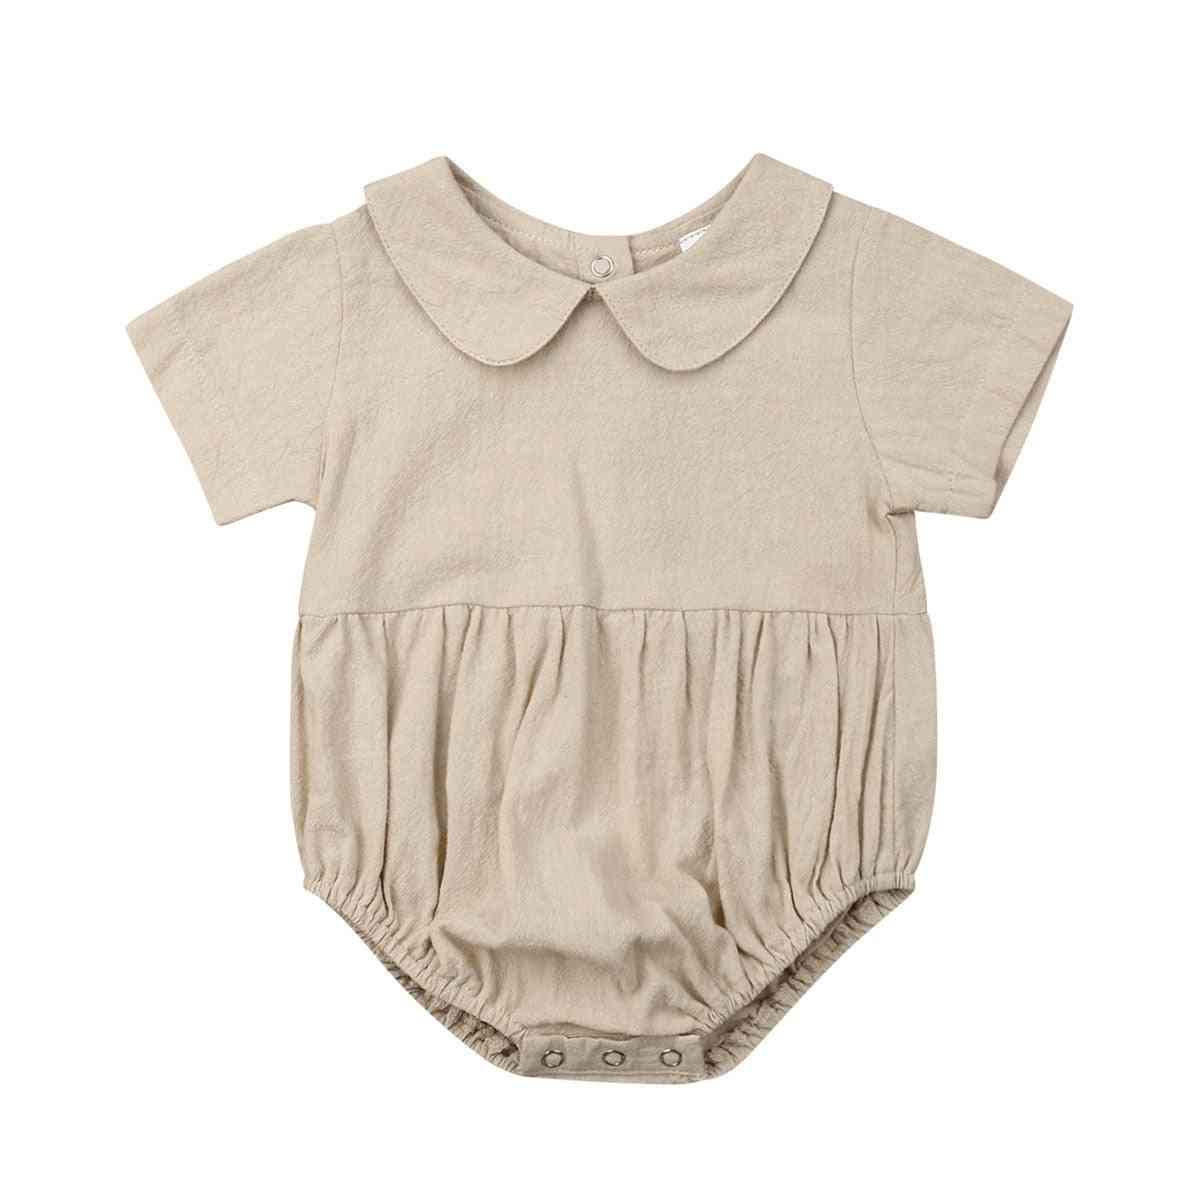 Baby Summer Clothing - Bodysuits Peter Pan Collar, Jumpsuits Outfits